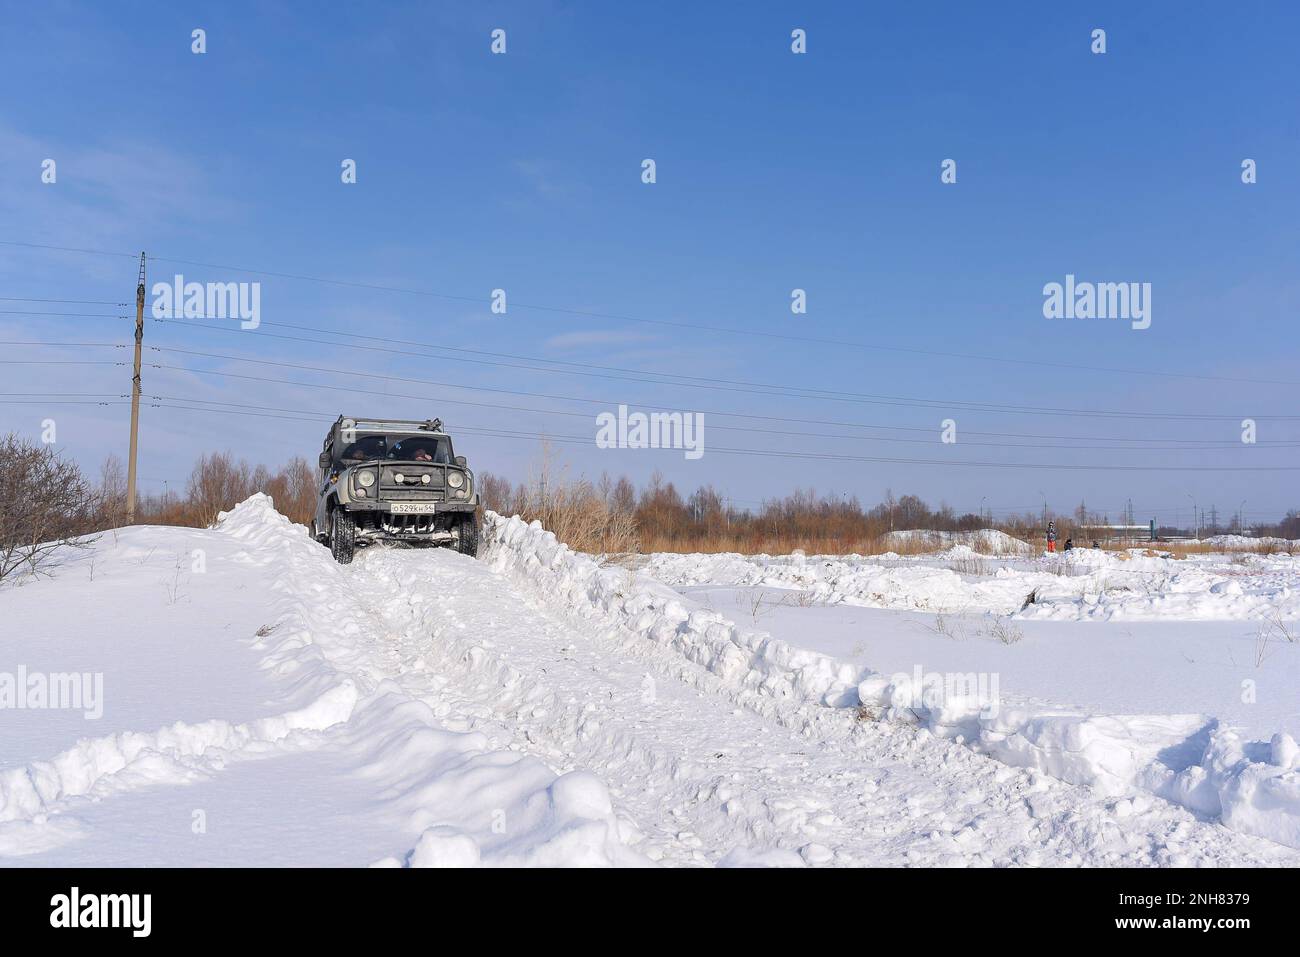 Russian offroad SUV 'UAZ hunter 469' 4x4 rides on a snowy mountain in winter in a field on a bad road. Stock Photo